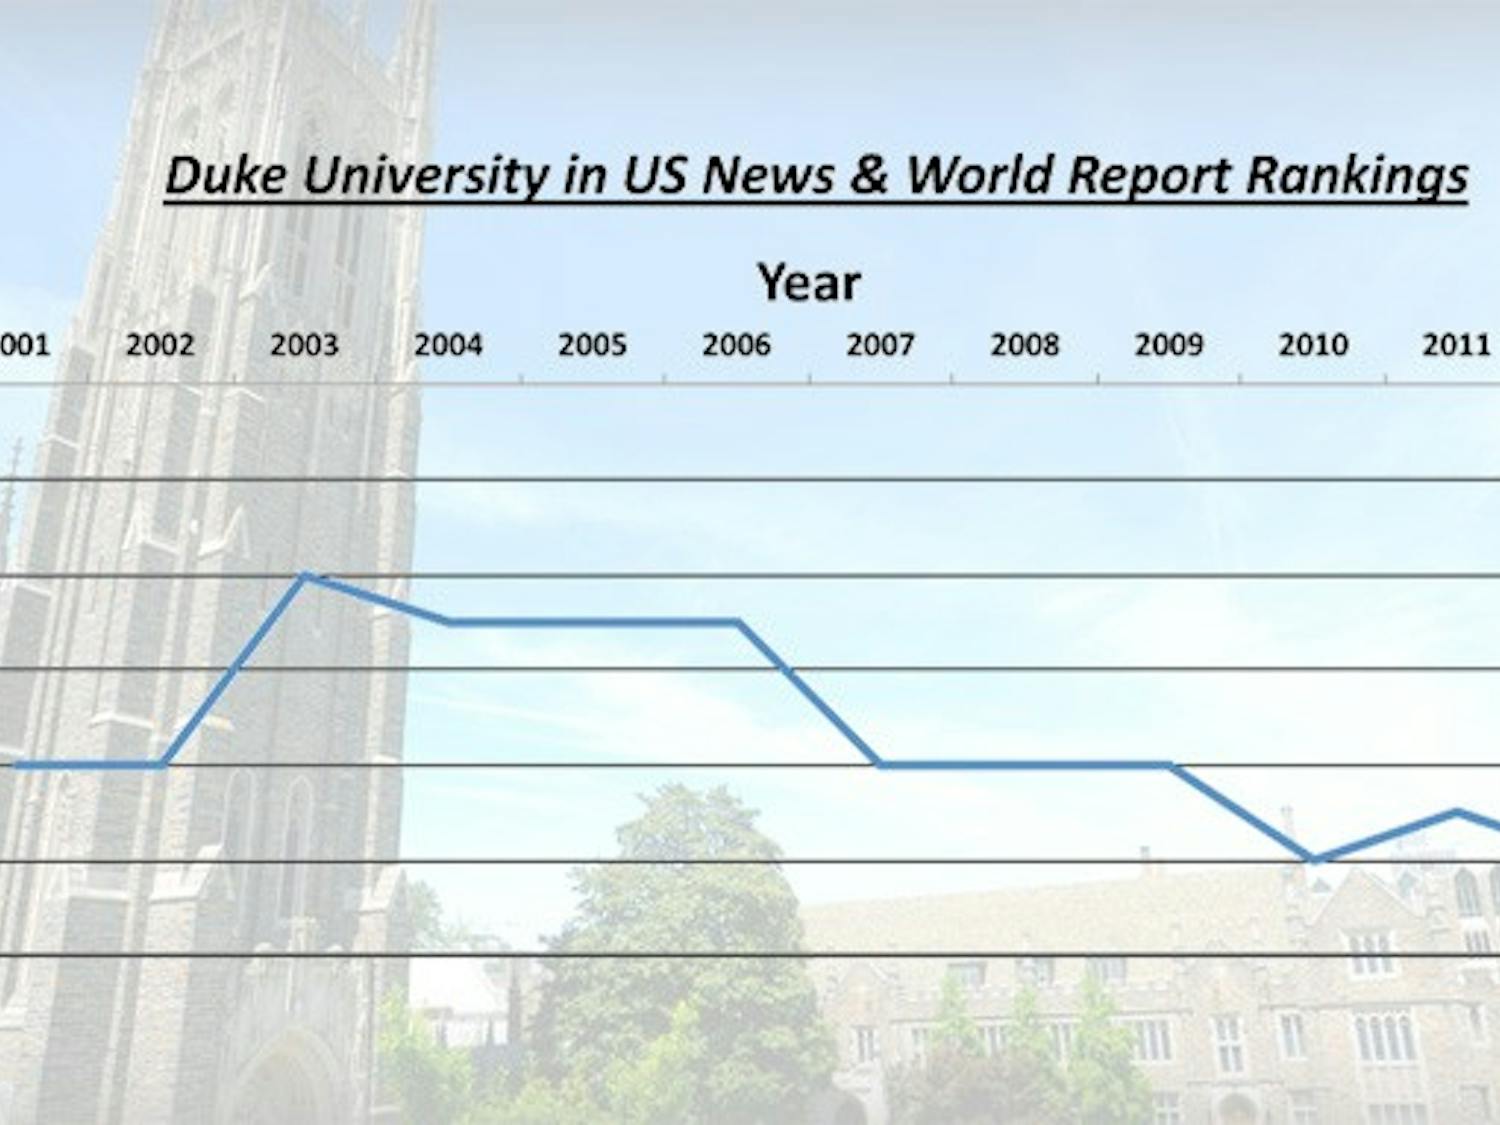 Duke has remained in the top 10 for the entirety of the past decade, but has fallen from a high of fourth in 2003 to a current ranking of No. 10.